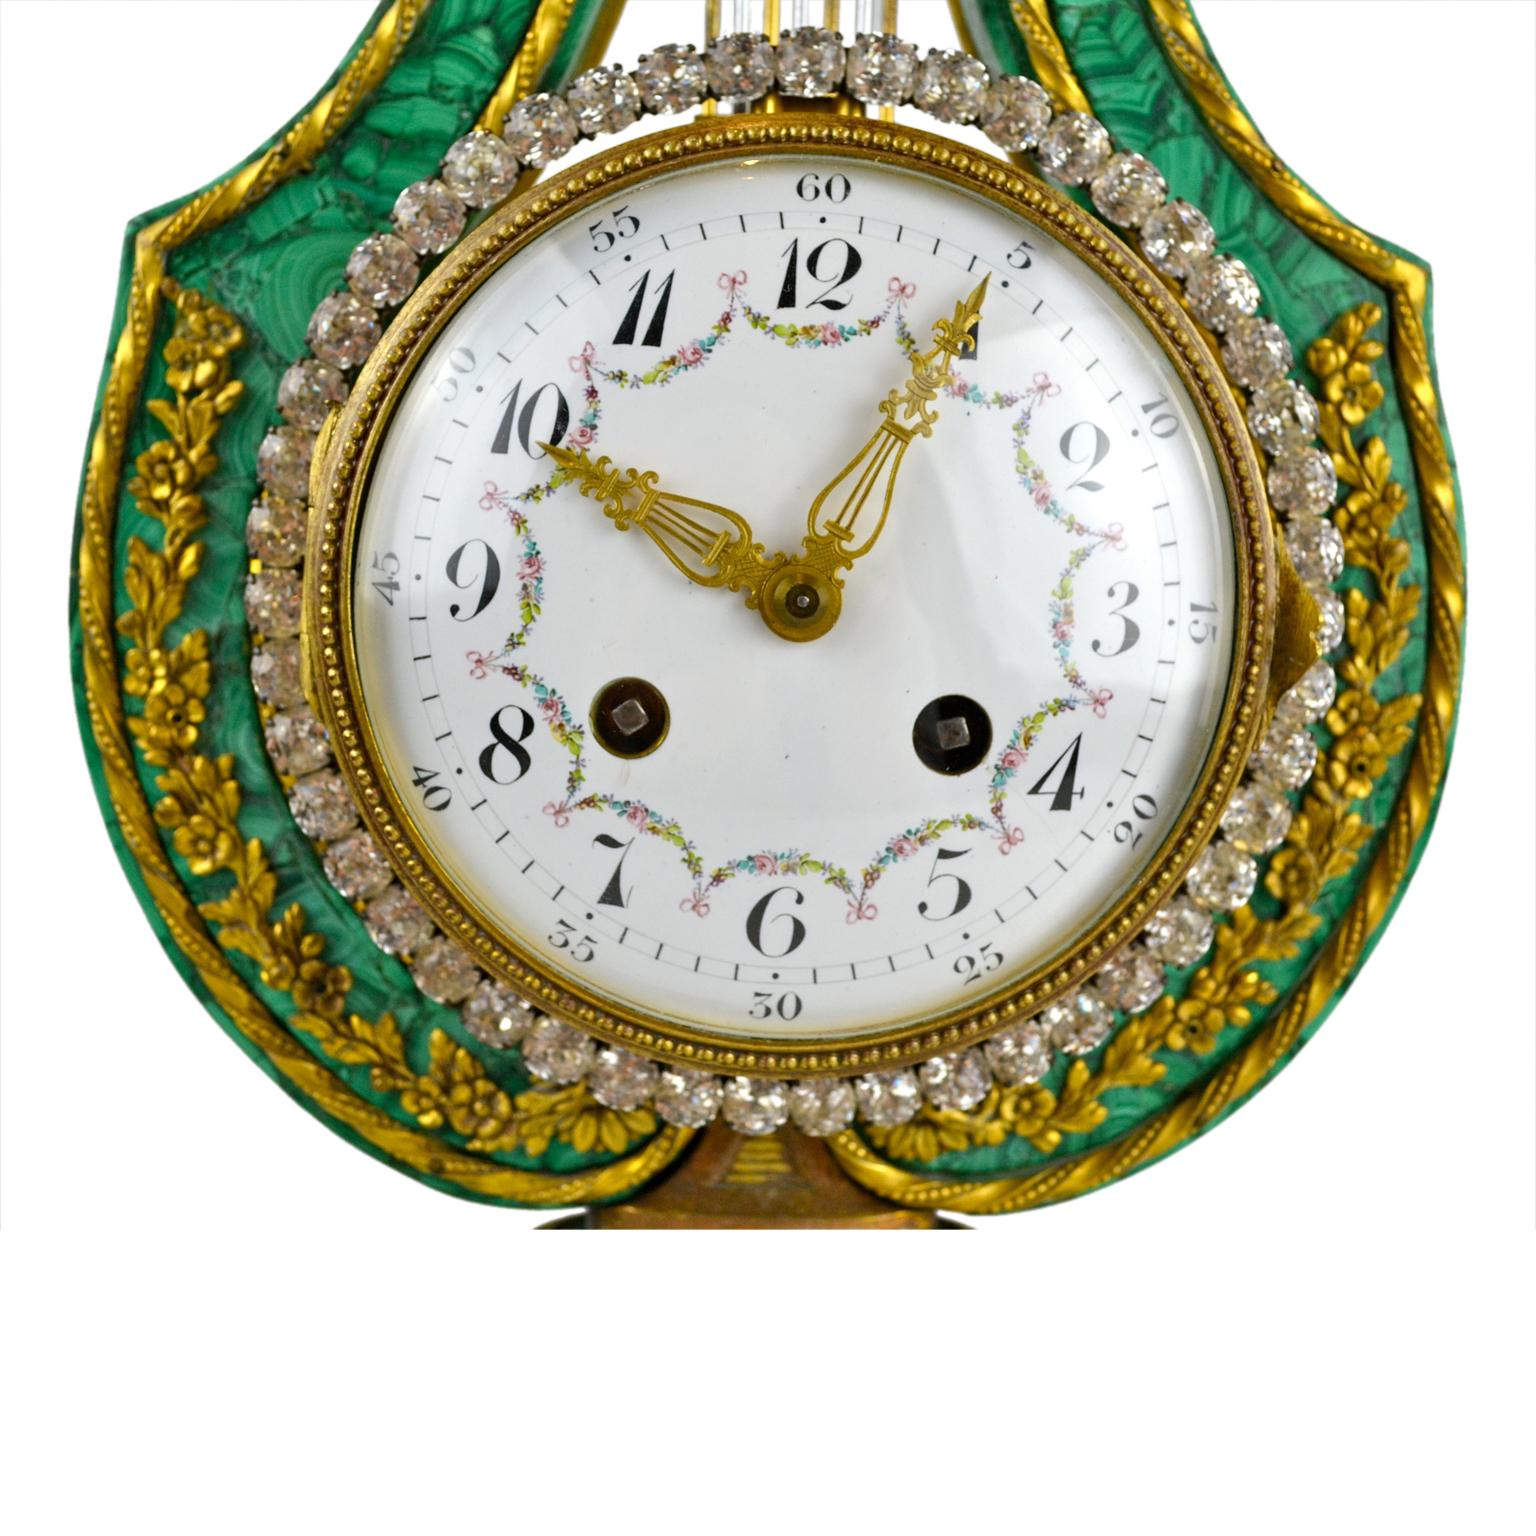 A fine late 19th century example of an 18th century Louis XVI malachite lyre mantel (fireplace) clock with musical references. Most examples of this model usually have white marble or ‘Sevres’ porcelain ‘frames’, malachite being an unusual and